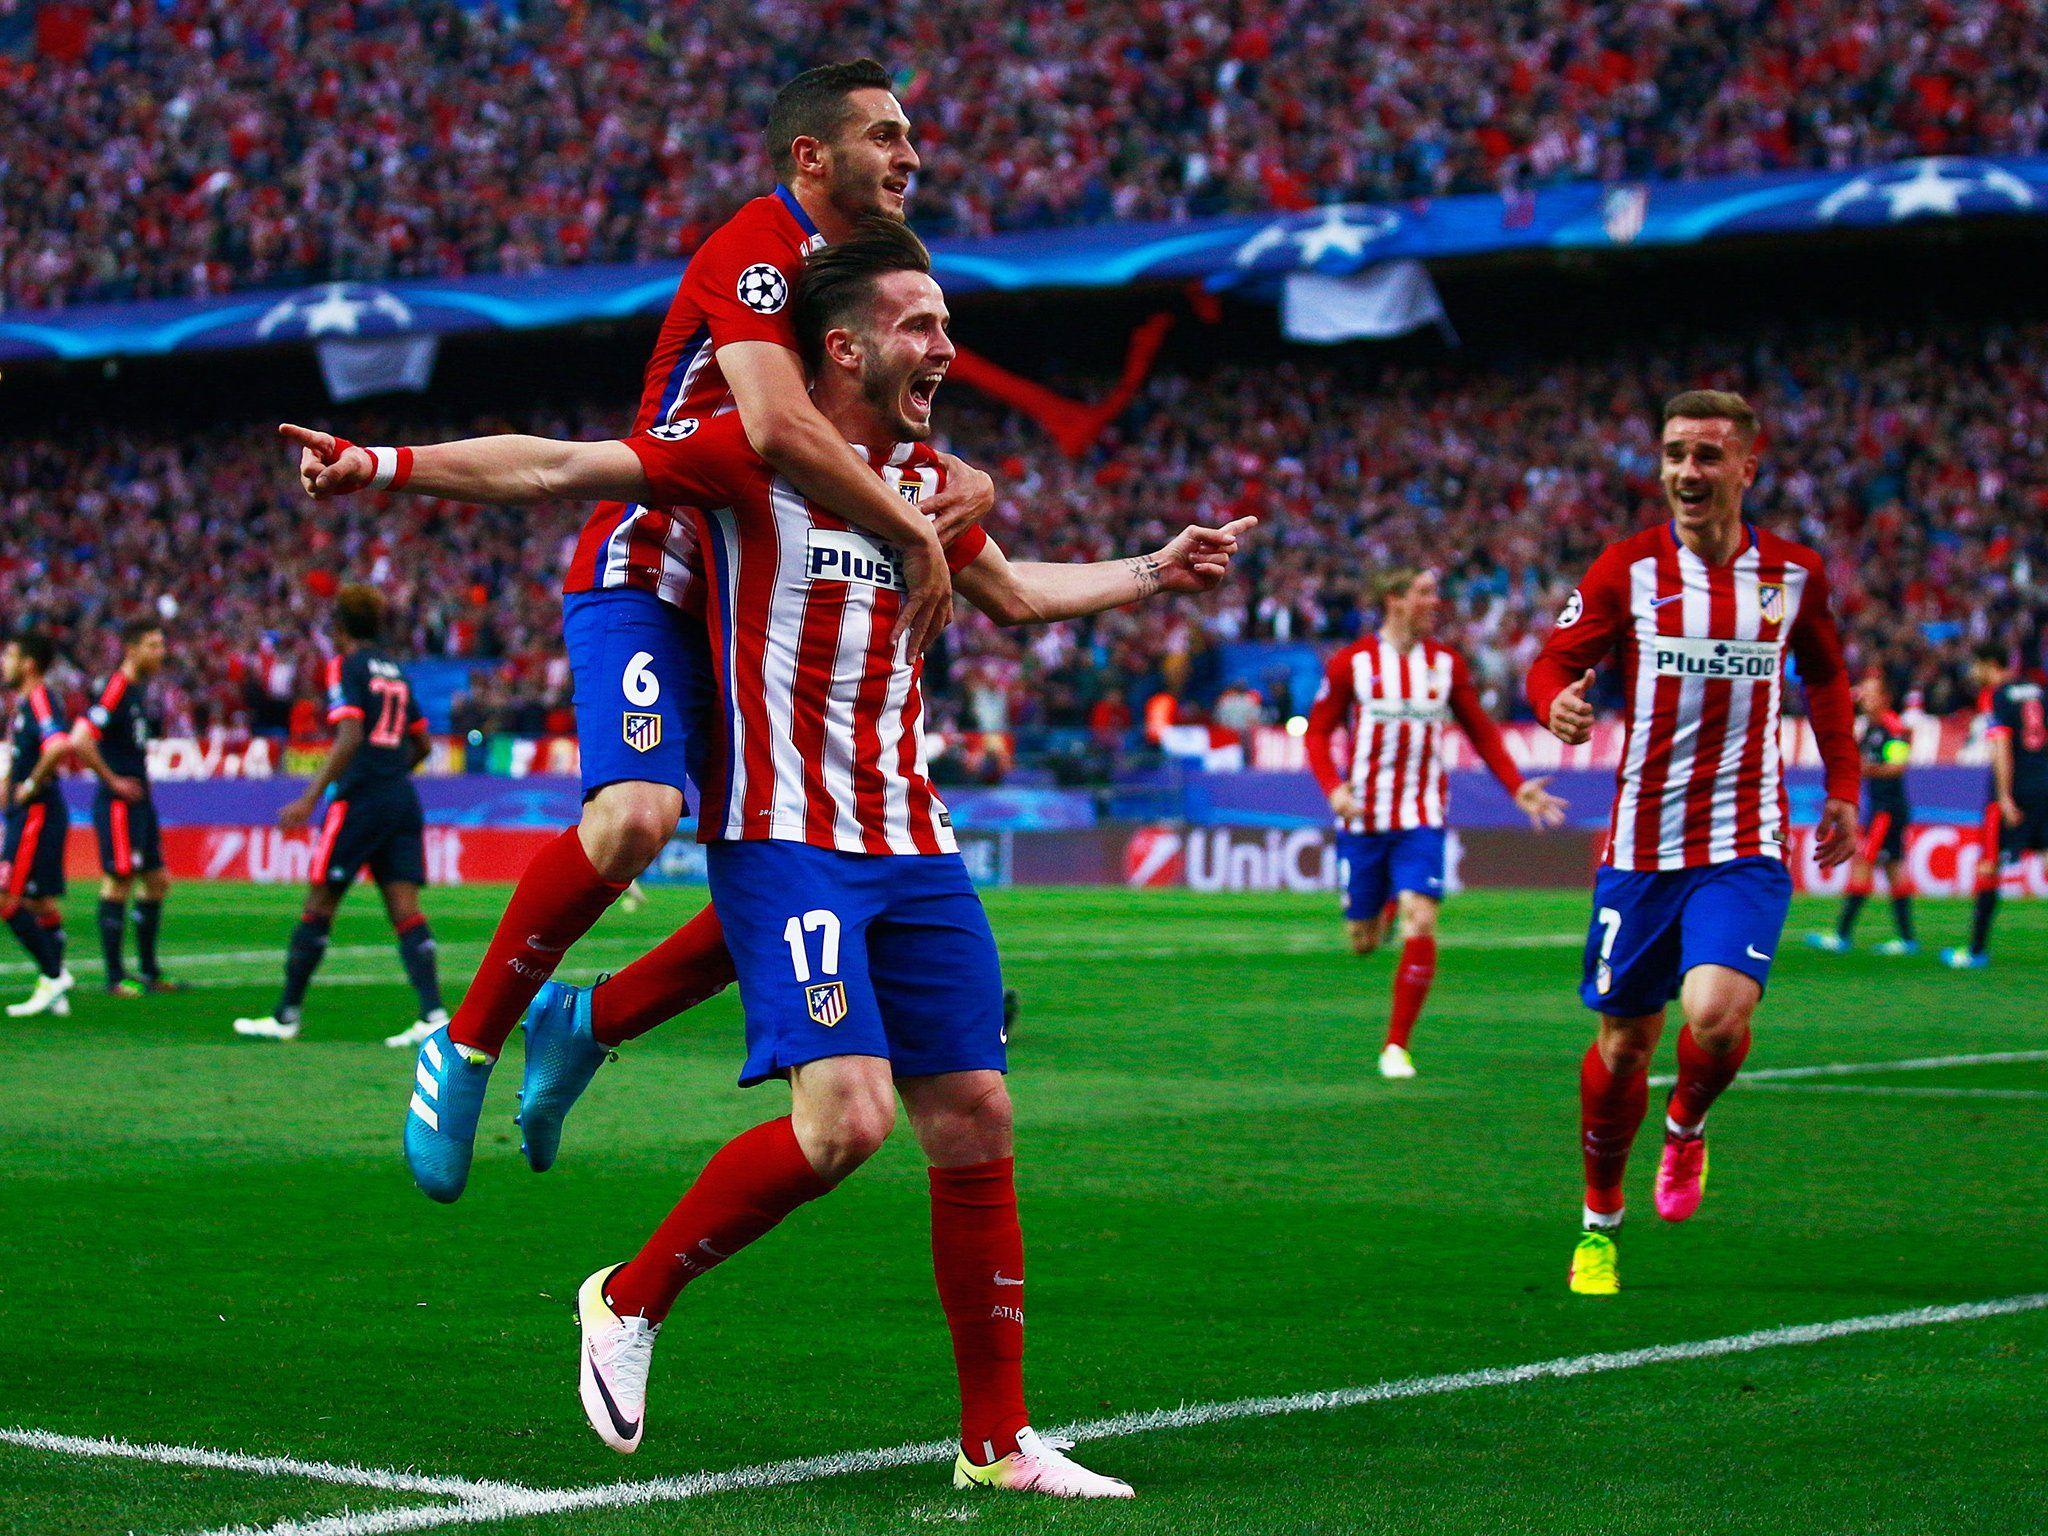 Saul Niguez goal video Manchester United target scores ‘goal of the